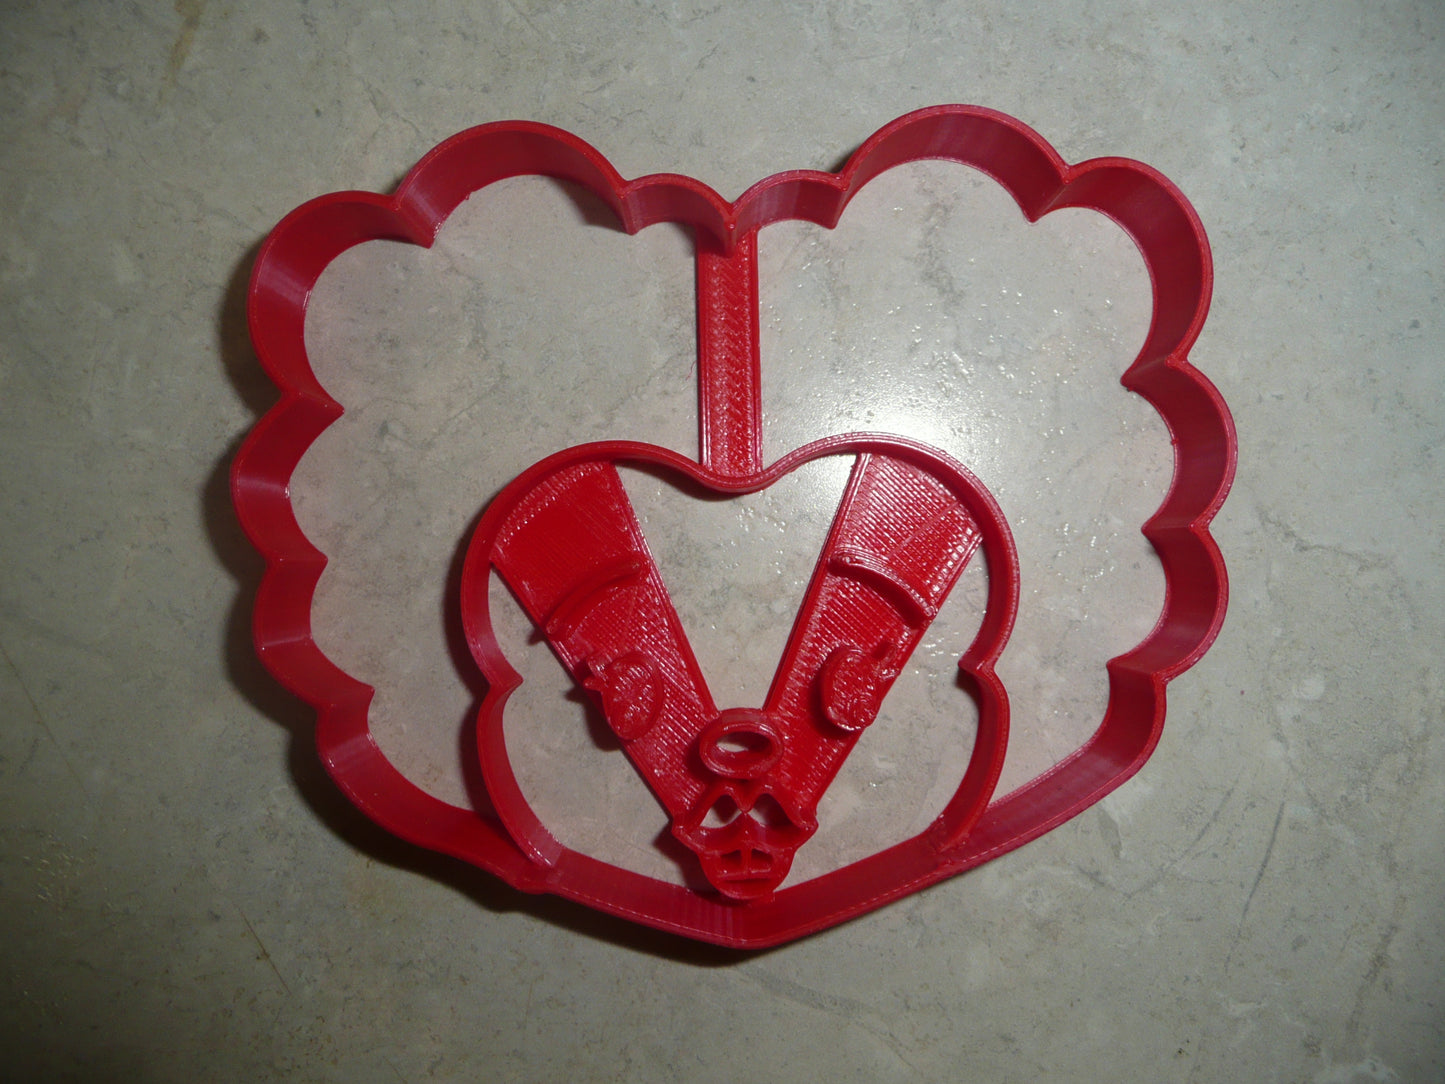 Detailed Winifred Face Hocus Pocus Halloween Movie Cookie Cutter USA PR3886